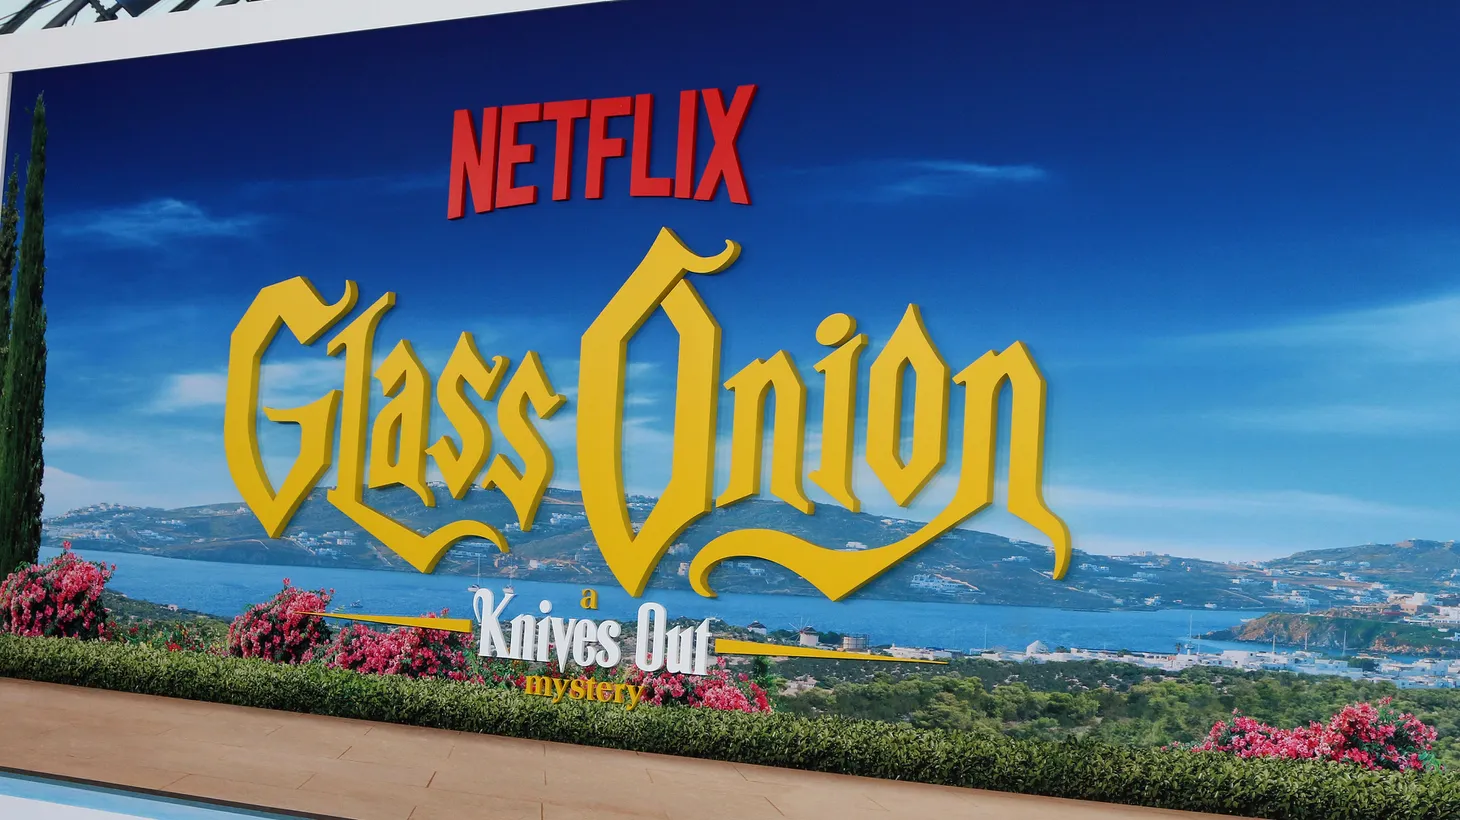 “You've got all these other filmmakers around Hollywood, who are doing movies for Netflix, looking at what they did for Rian Johnson saying, “Well, wait a second, where's my week-long release in 600 theaters?” says Matt Belloni, founding partner of Puck News. A "Glass Onion - A Knives Out Mystery" sign posted at the Motion Picture Academy Museum Los Angeles, on November 14, 2022.